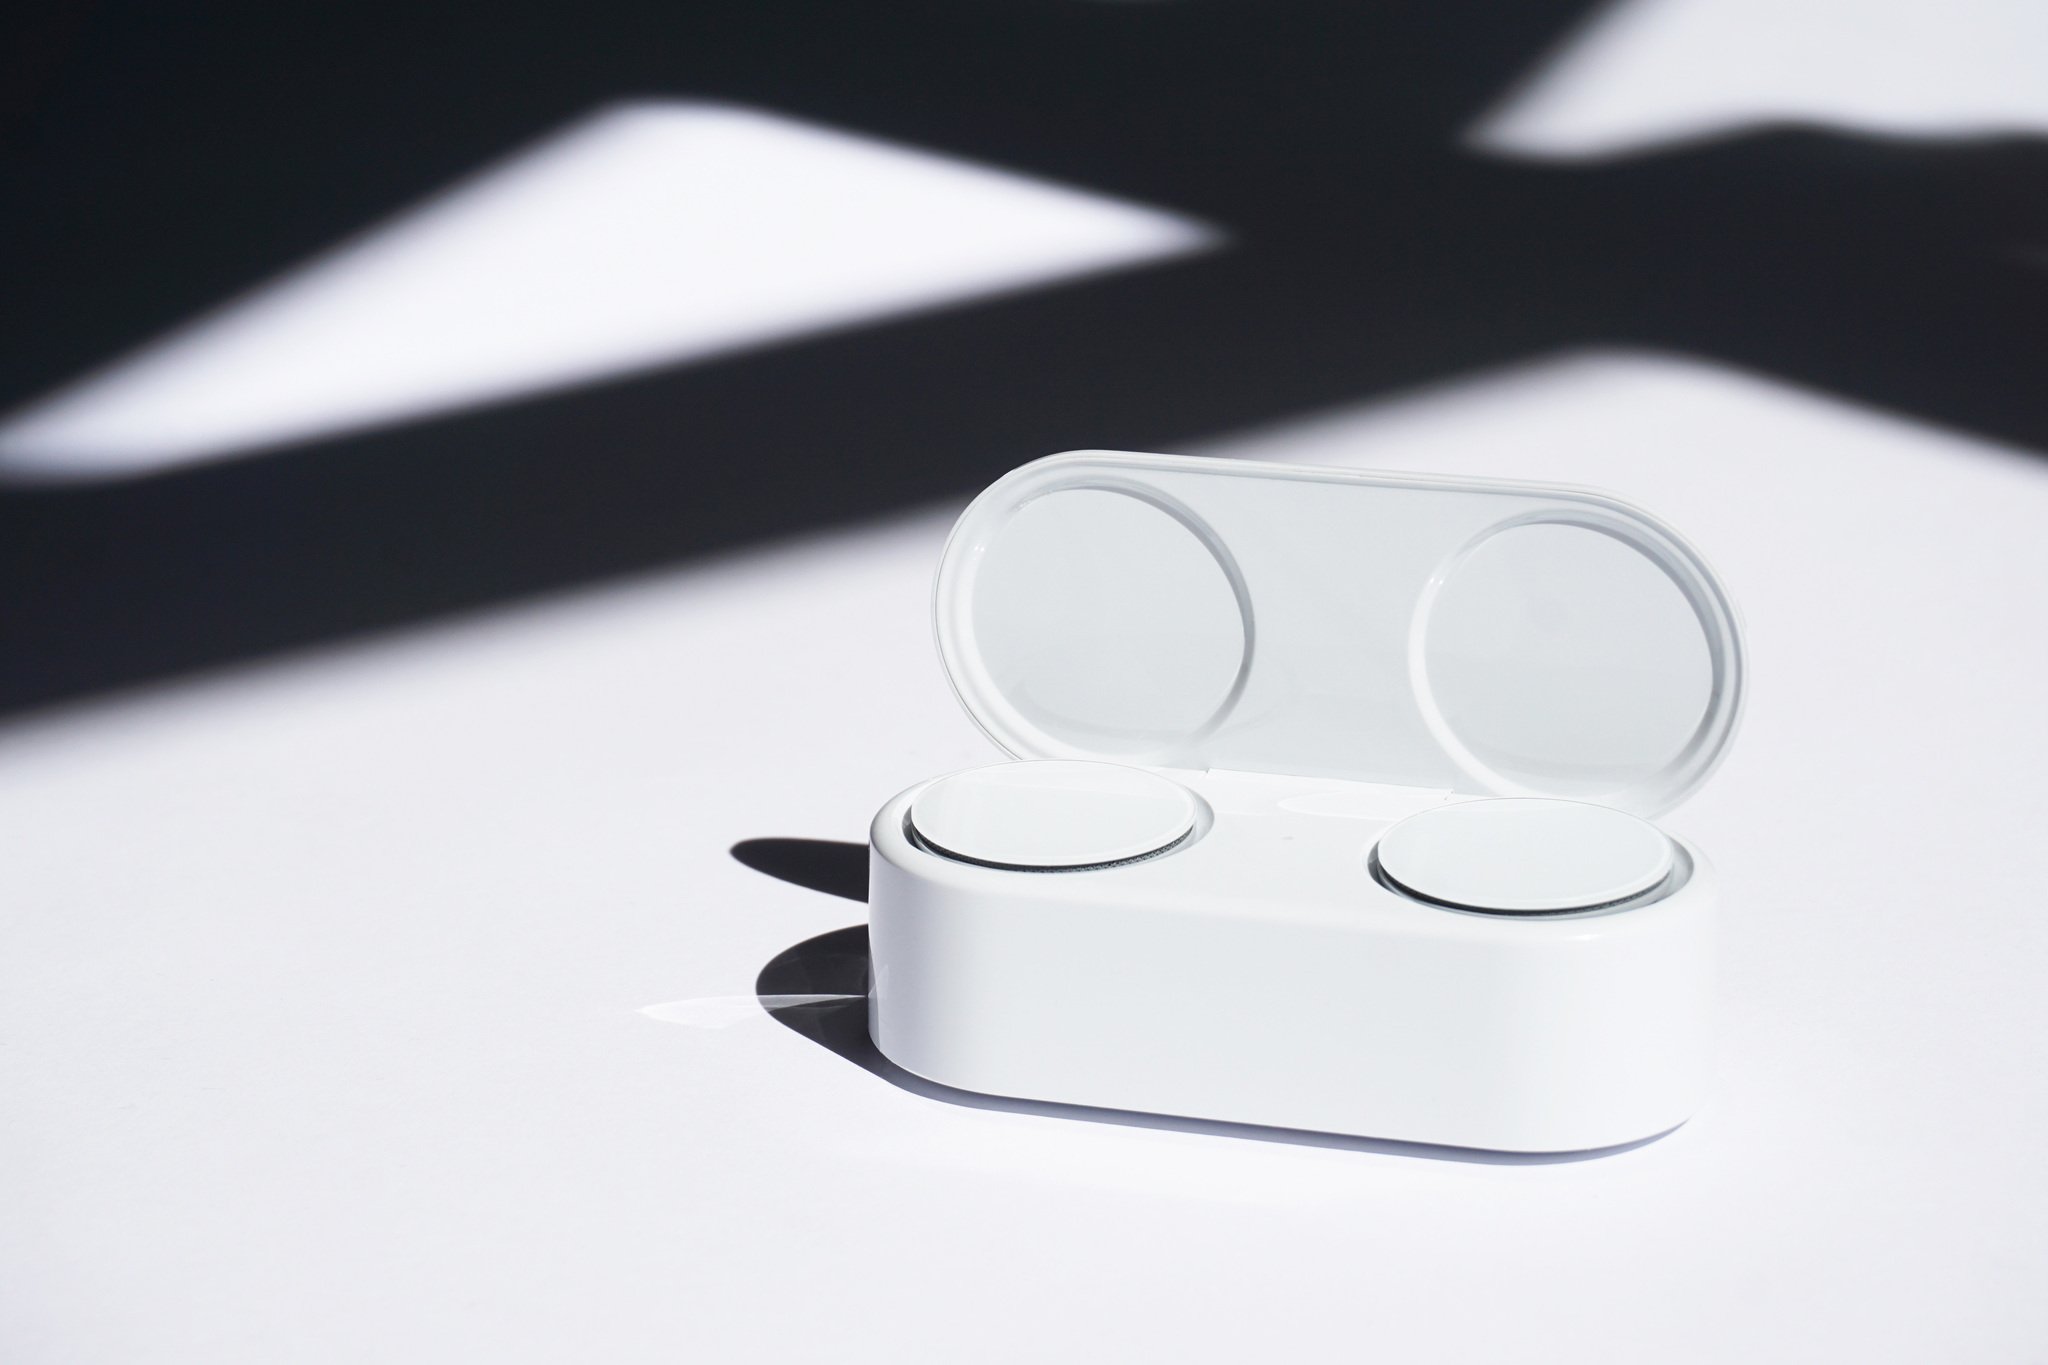 Surface Earbuds in Case